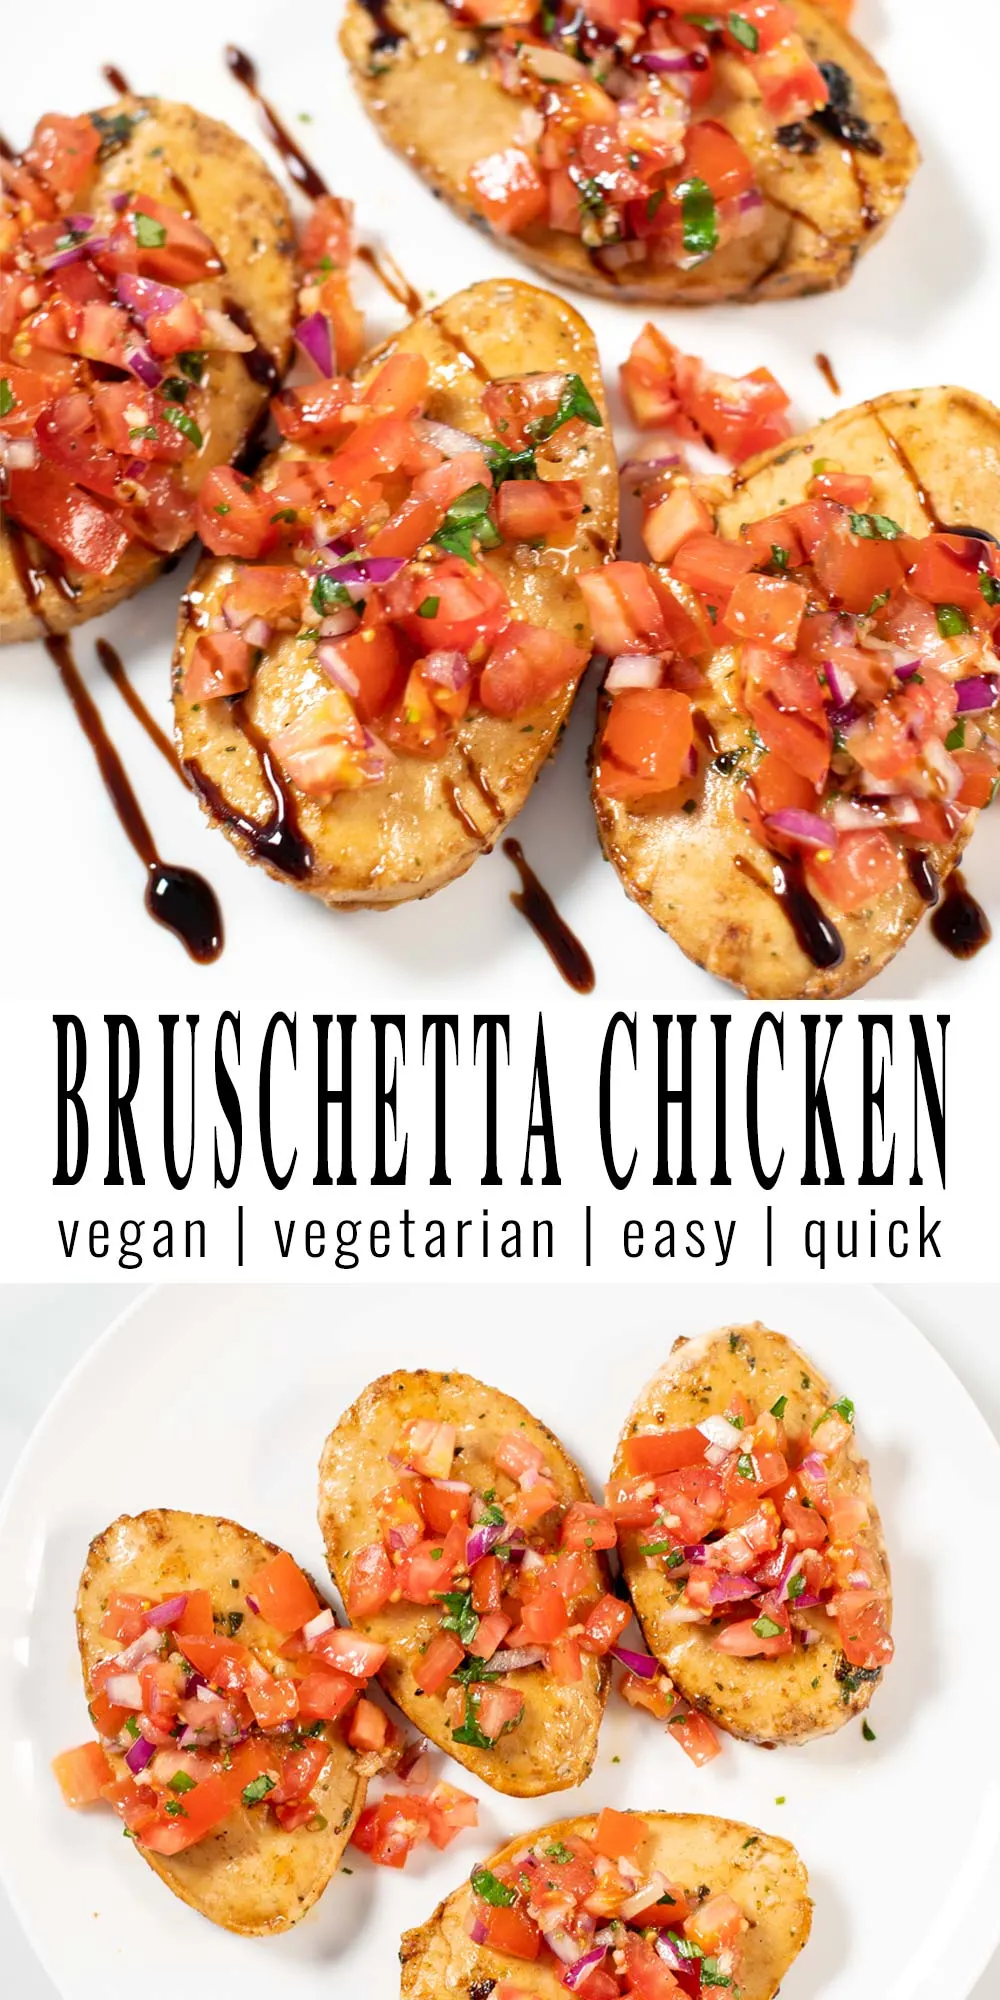 Two photos of Bruschetta Chicken with recipe title text.